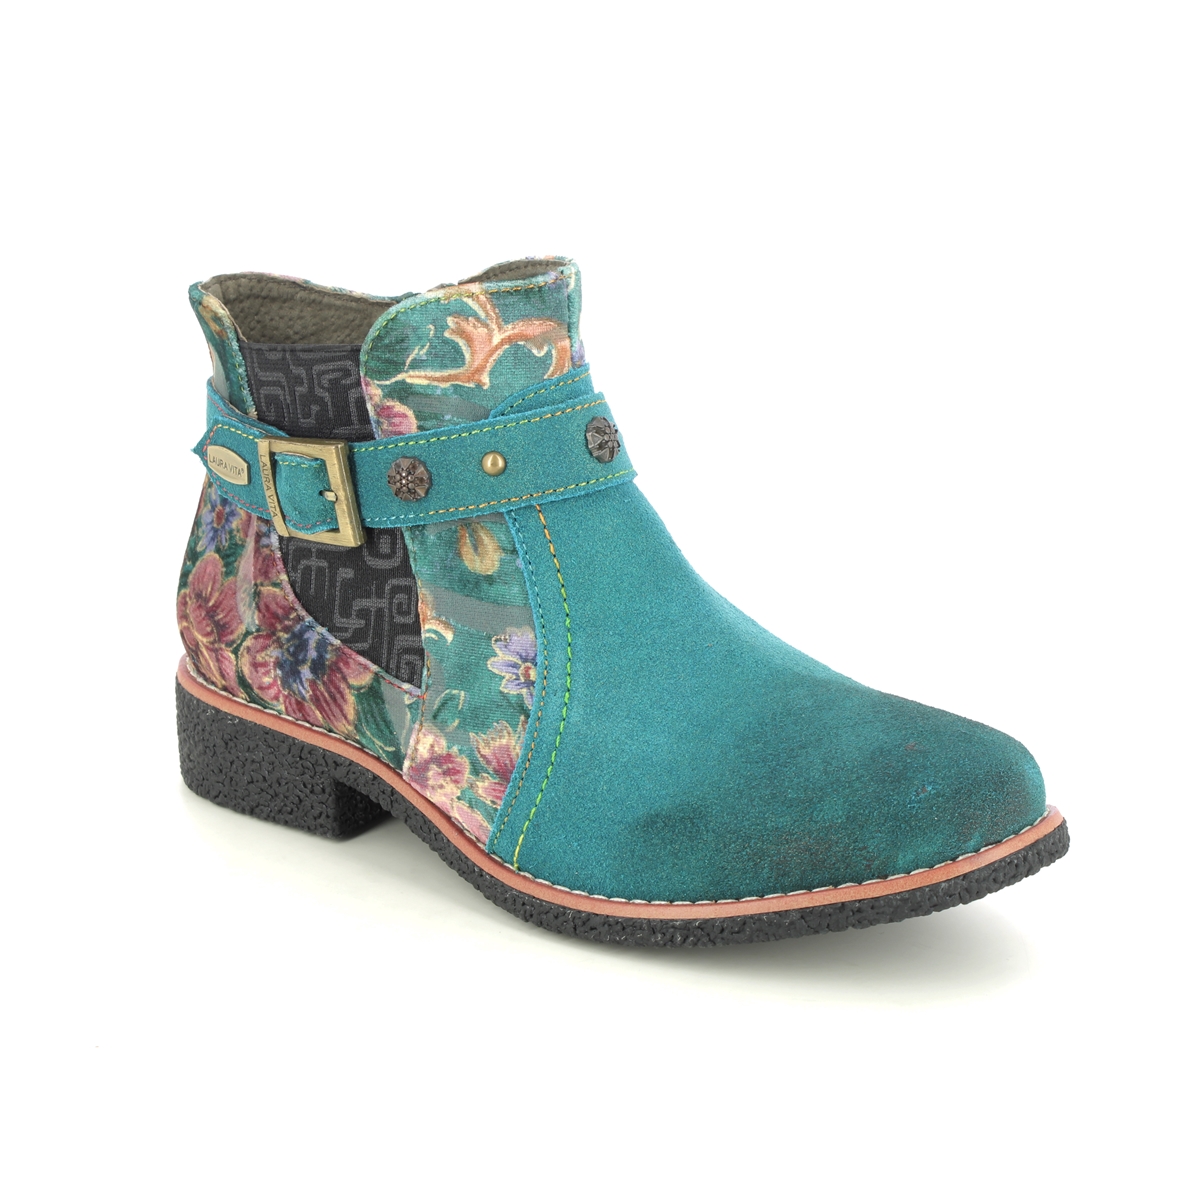 Laura Vita - Cocralieo 04 (Turquoise Leather) 4195-94 In Size 38 In Floral Turquoise Leather